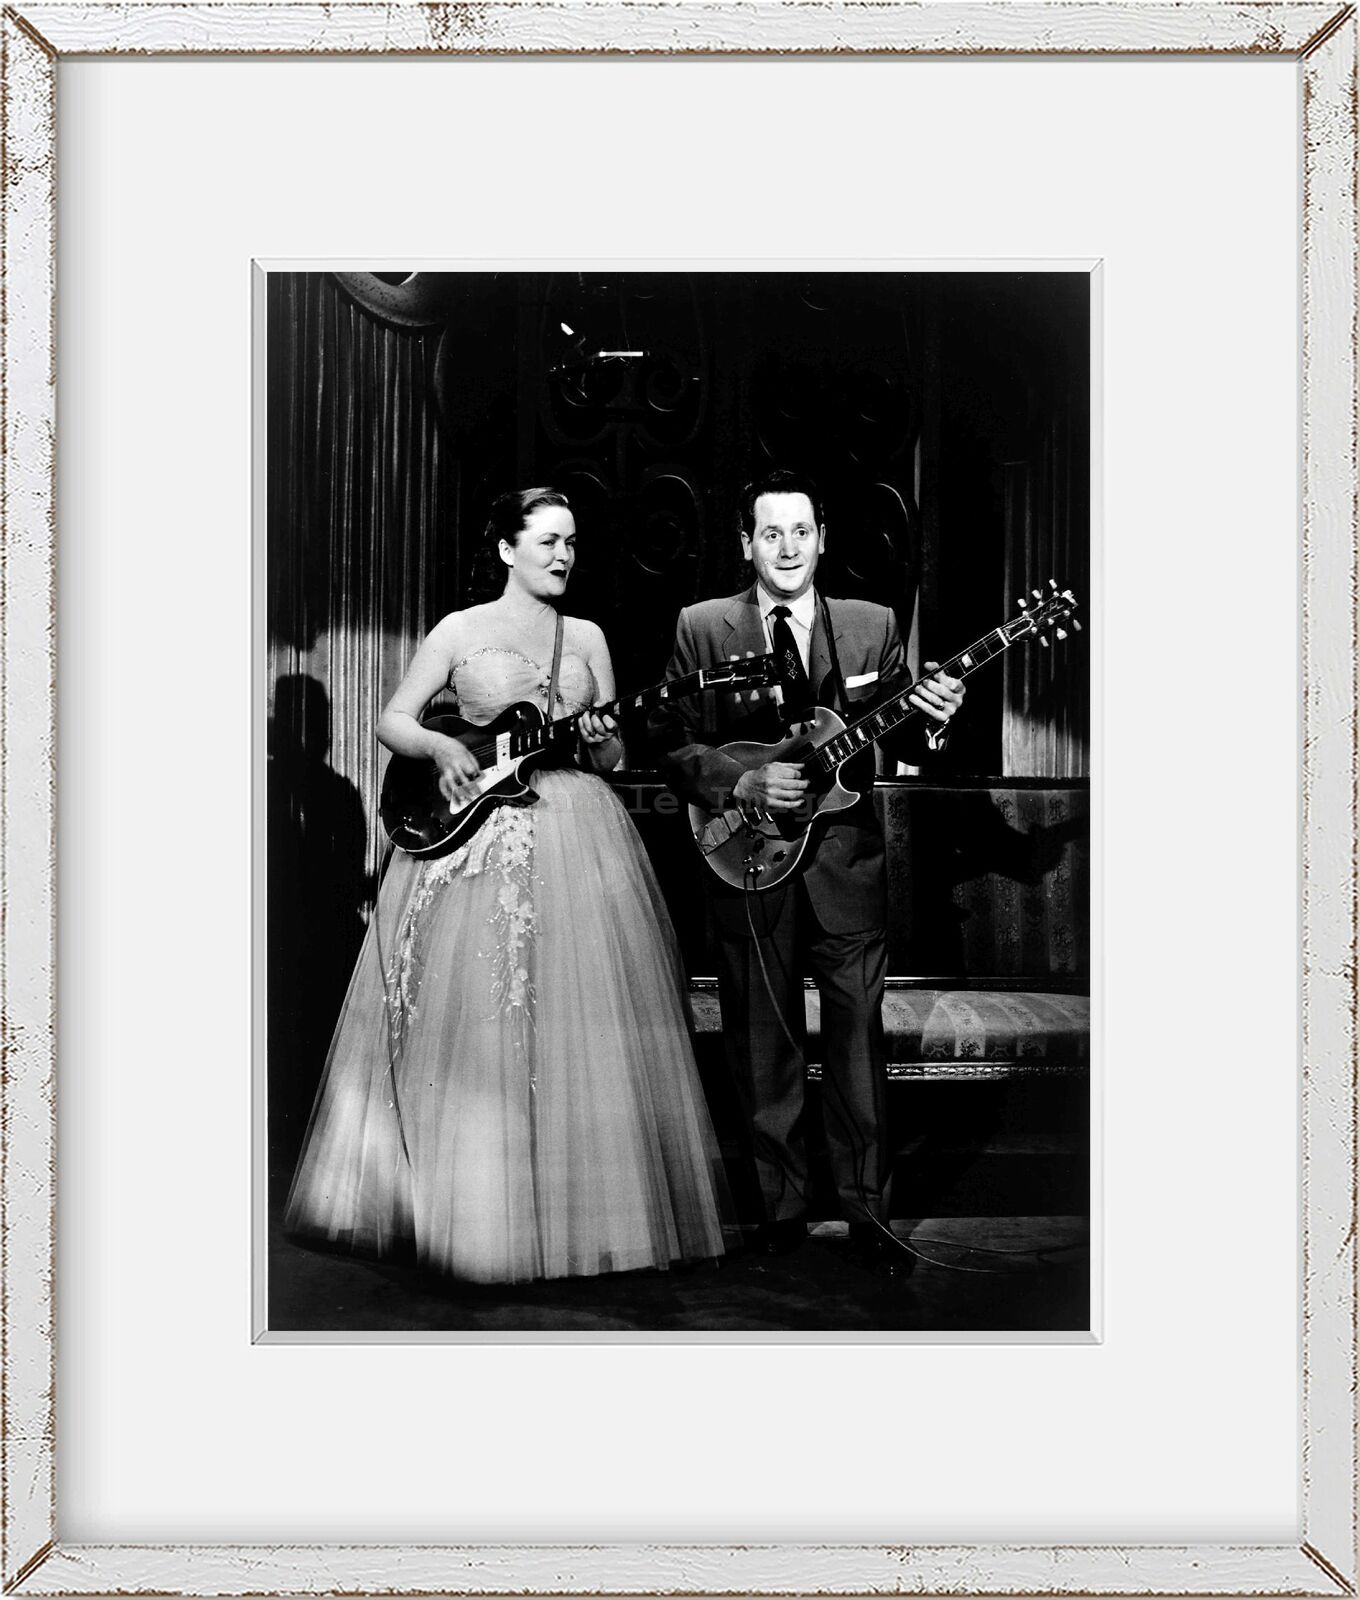 Photo: Les Paul, Mary Ford, Playing Guitars, Singers, 1957, Lester William Polsf